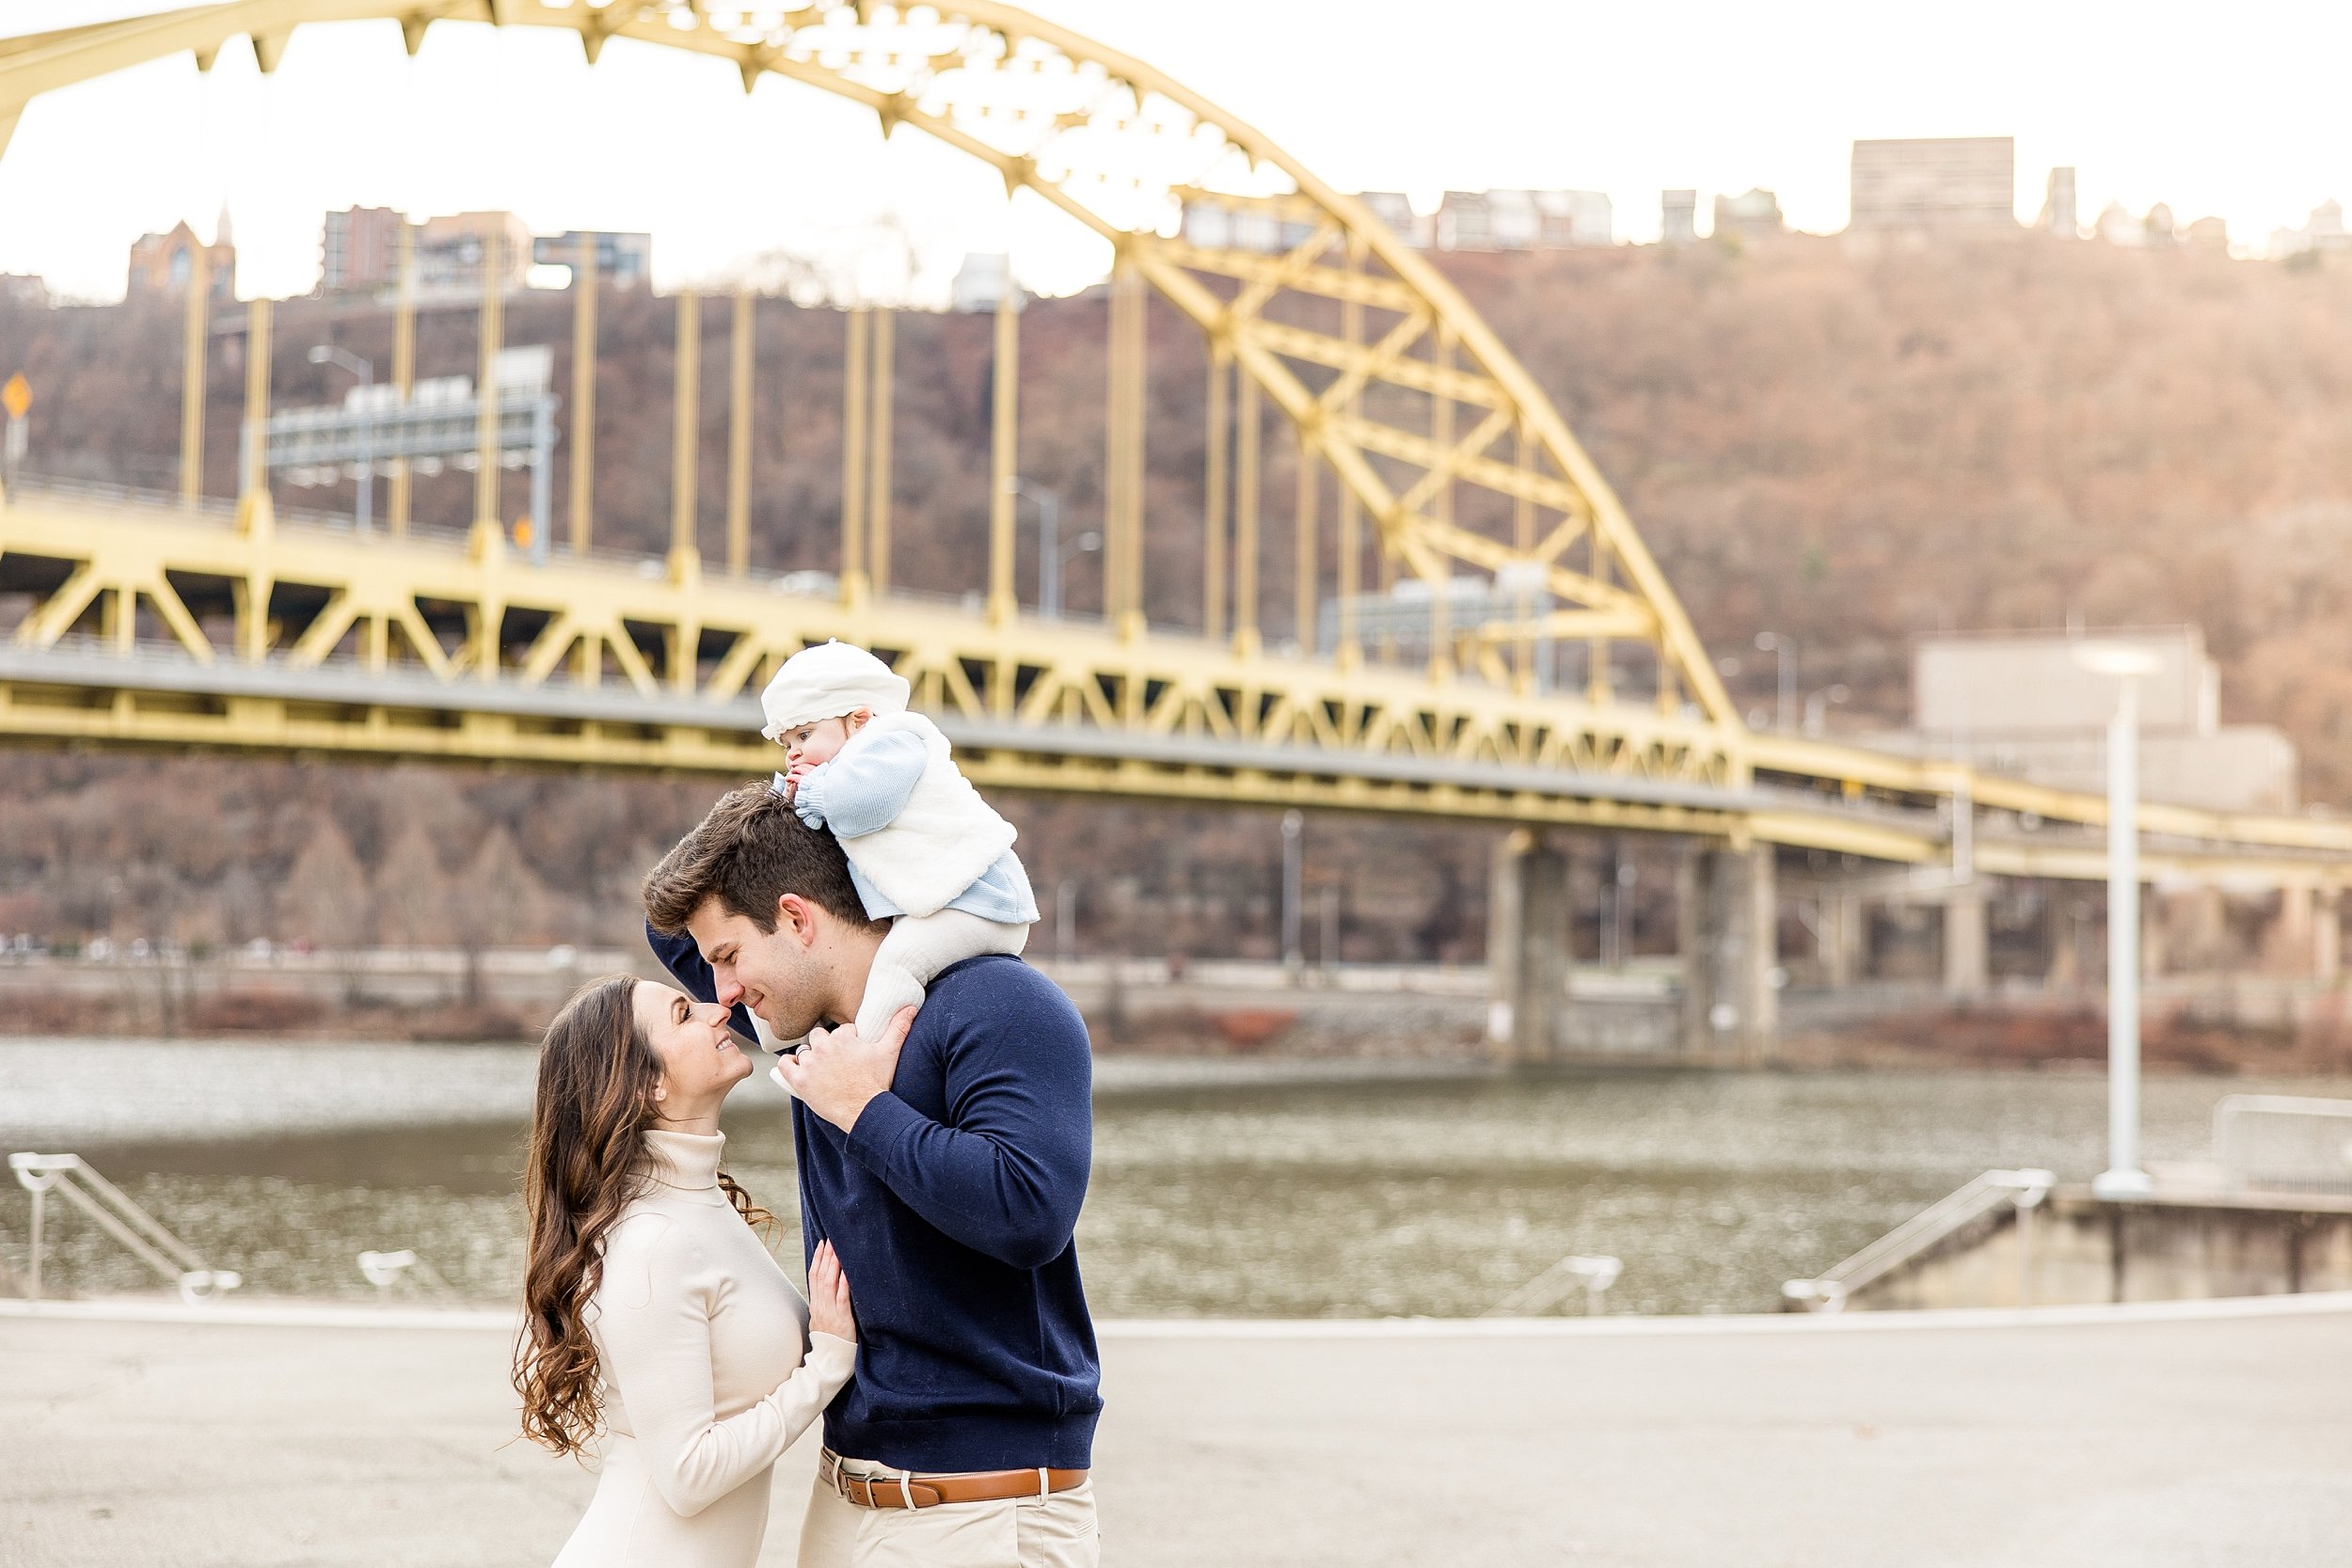 pittsburgh family photographer, point state park family photos, cranberry township photographer, zelienople family photographer